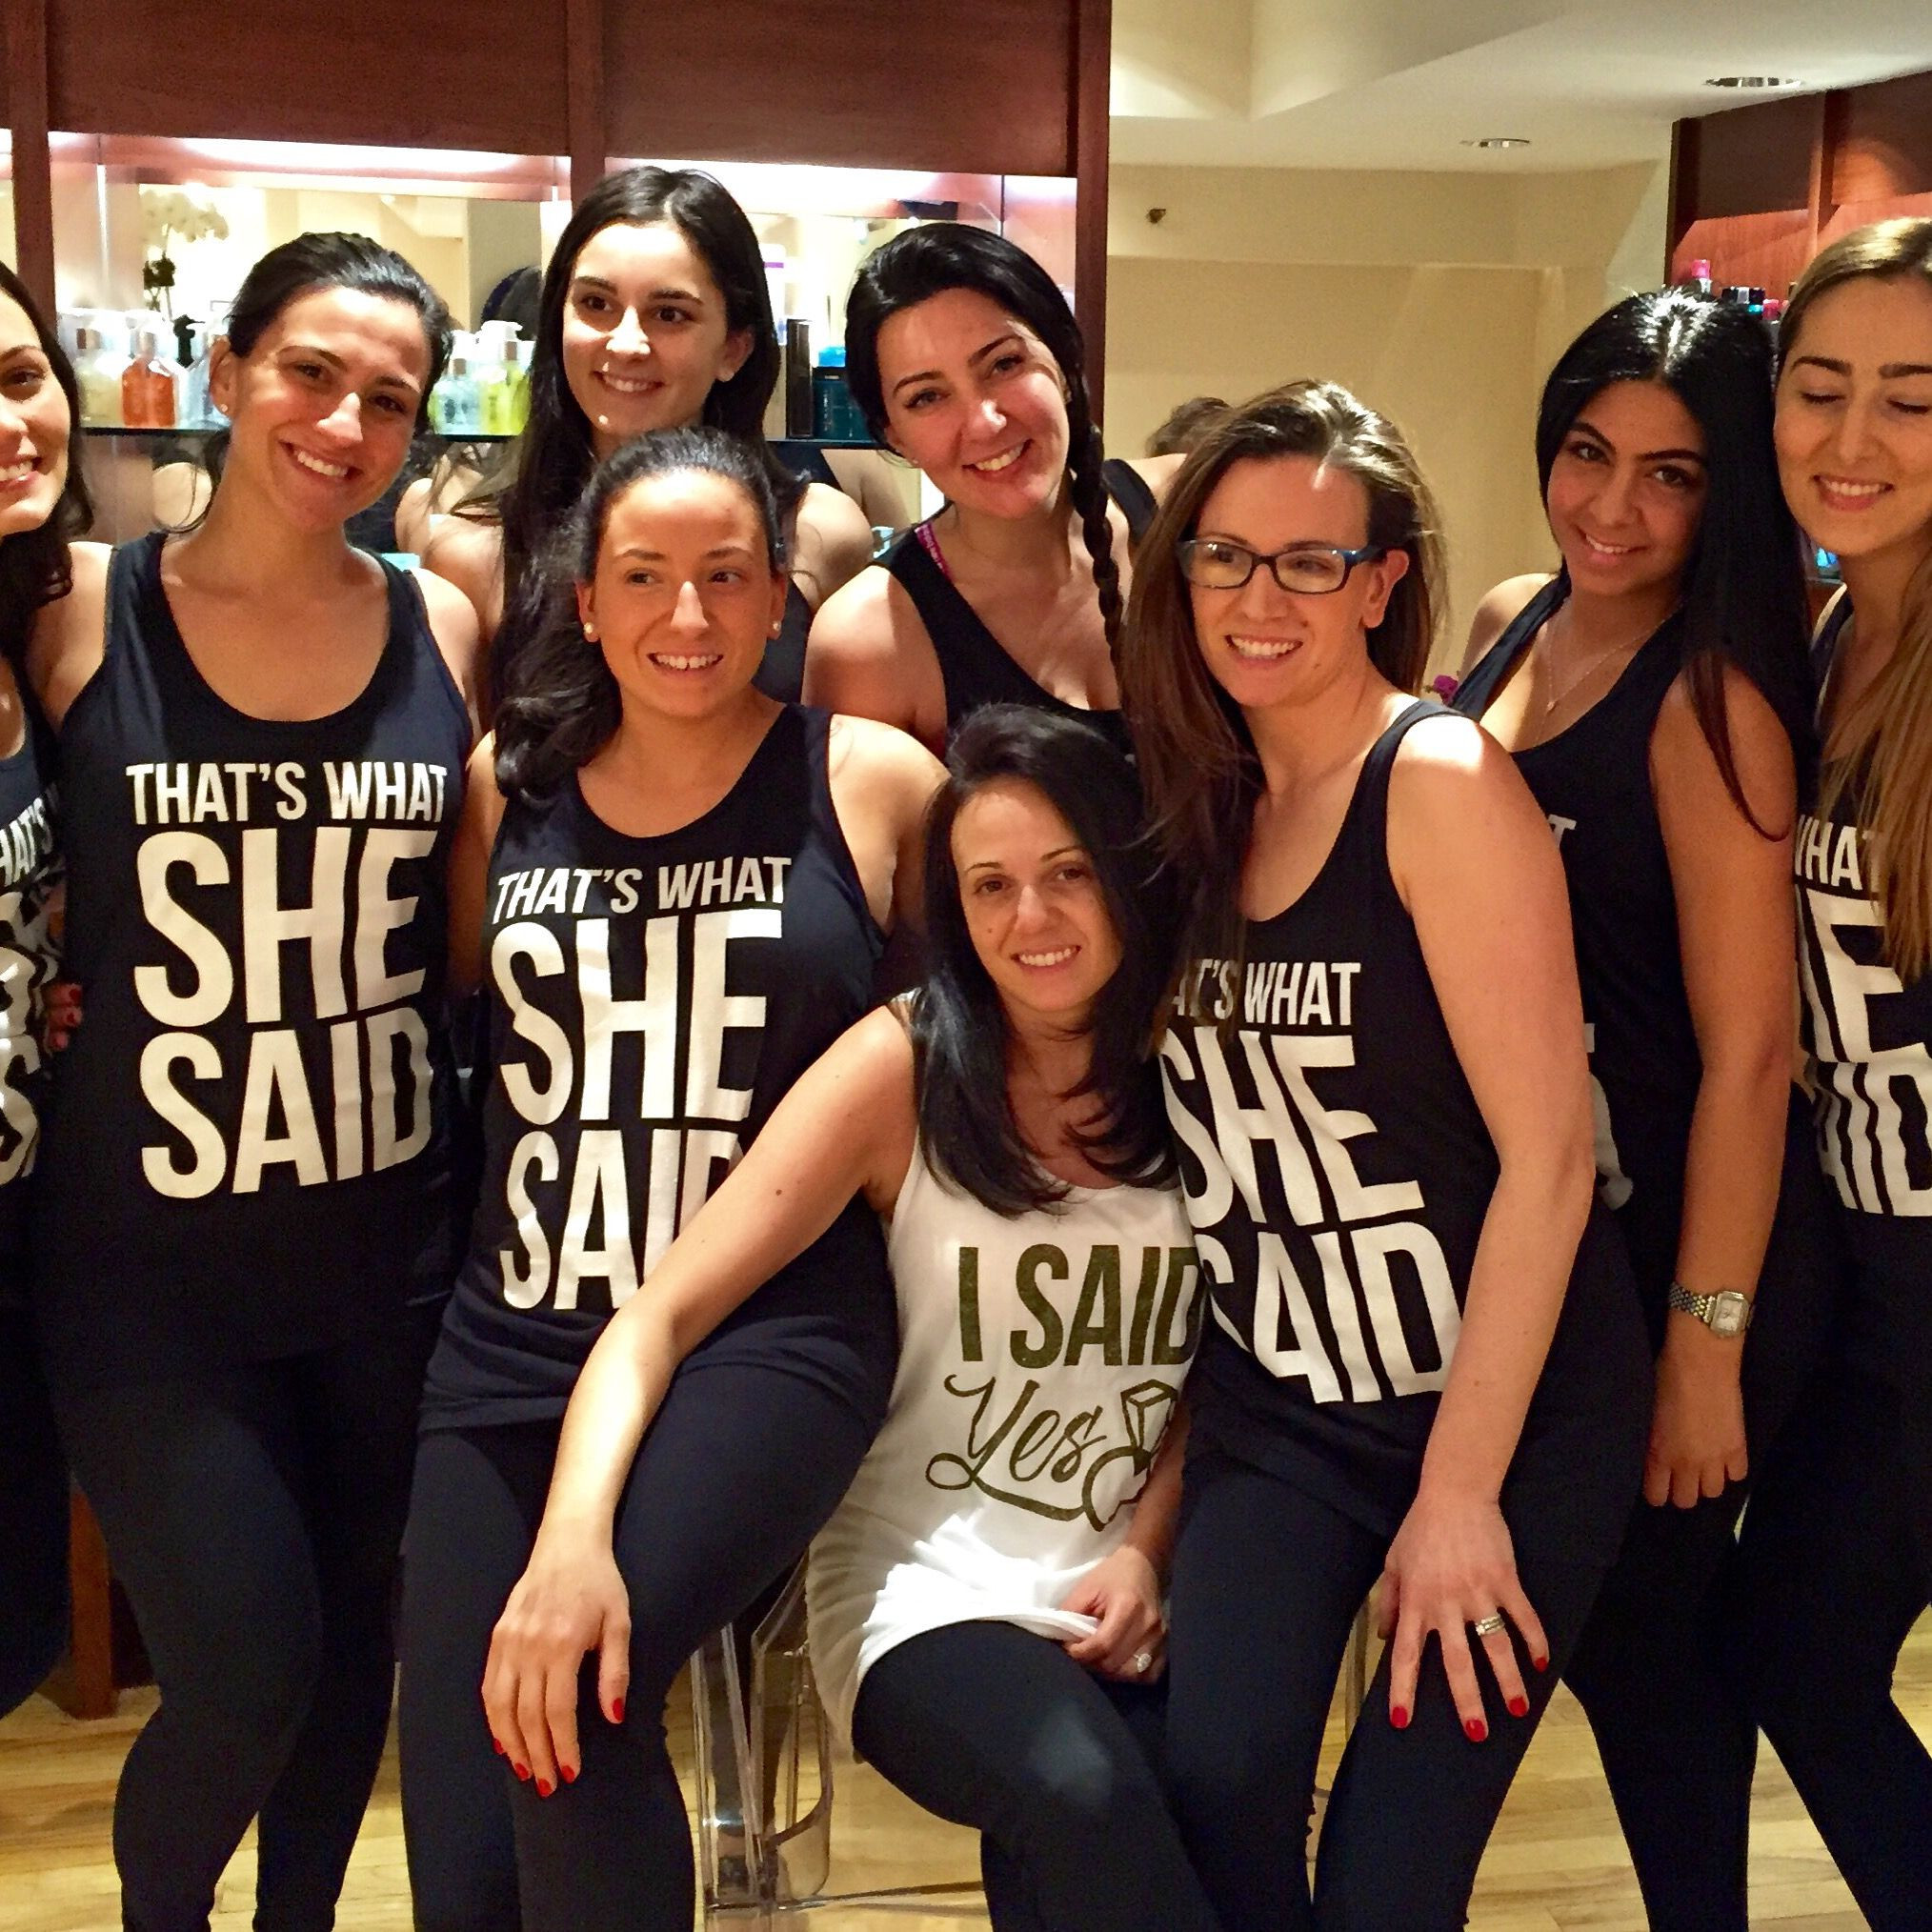 Spa Day Bachelorette Party Ideas
 Bachelorette Spa Party in NYC Allure Day Spa NYC